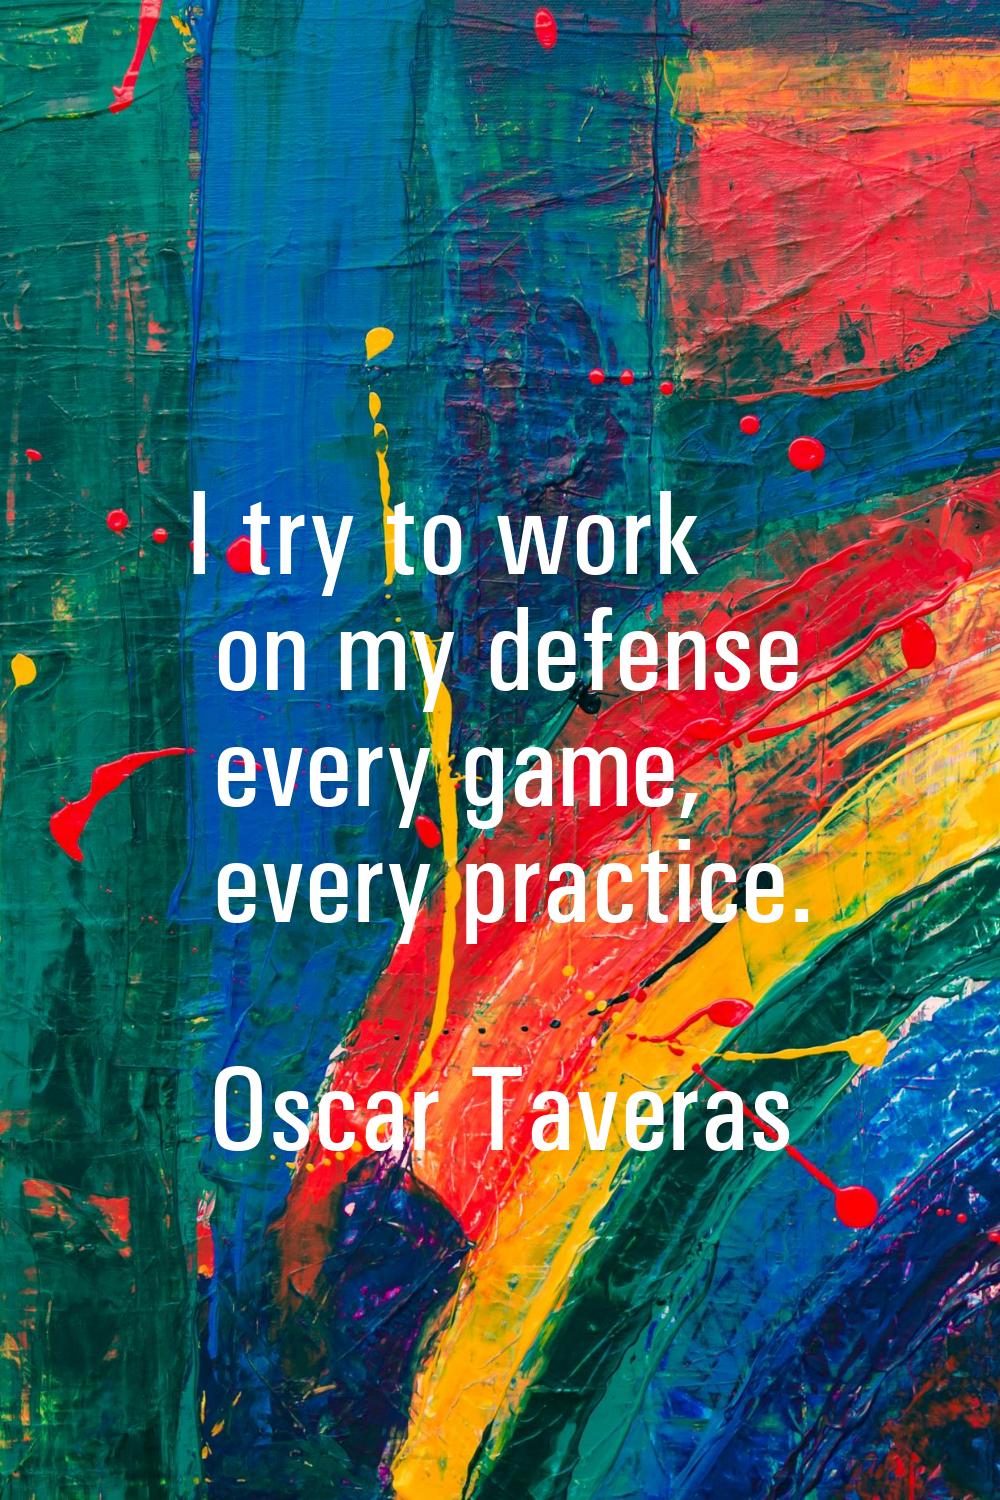 I try to work on my defense every game, every practice.